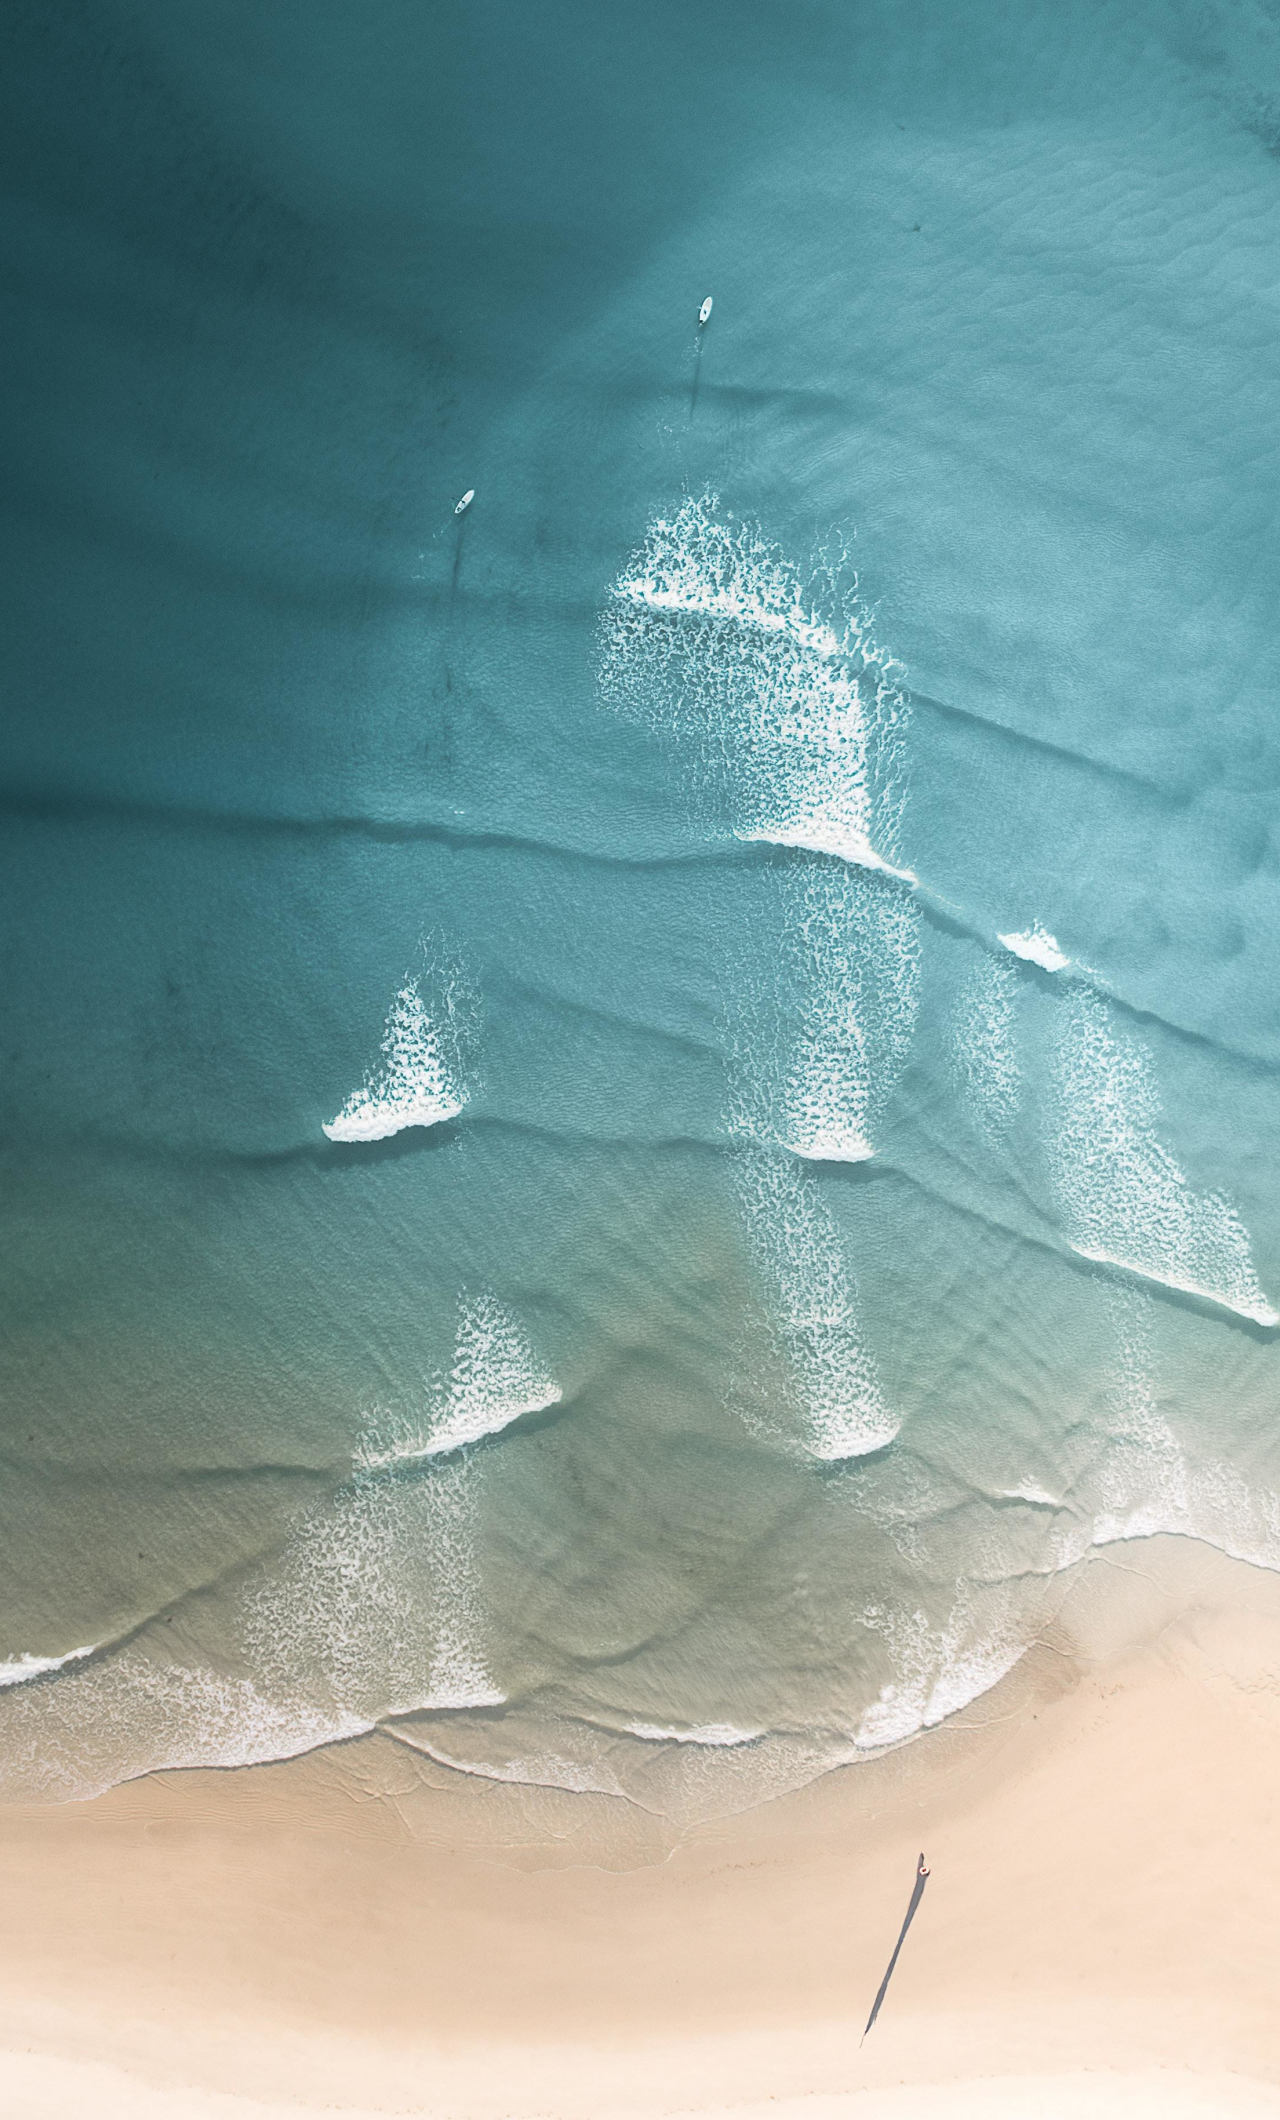 Download wallpaper x peaceful beach calm sea waves aerial view iphone plus x hd background